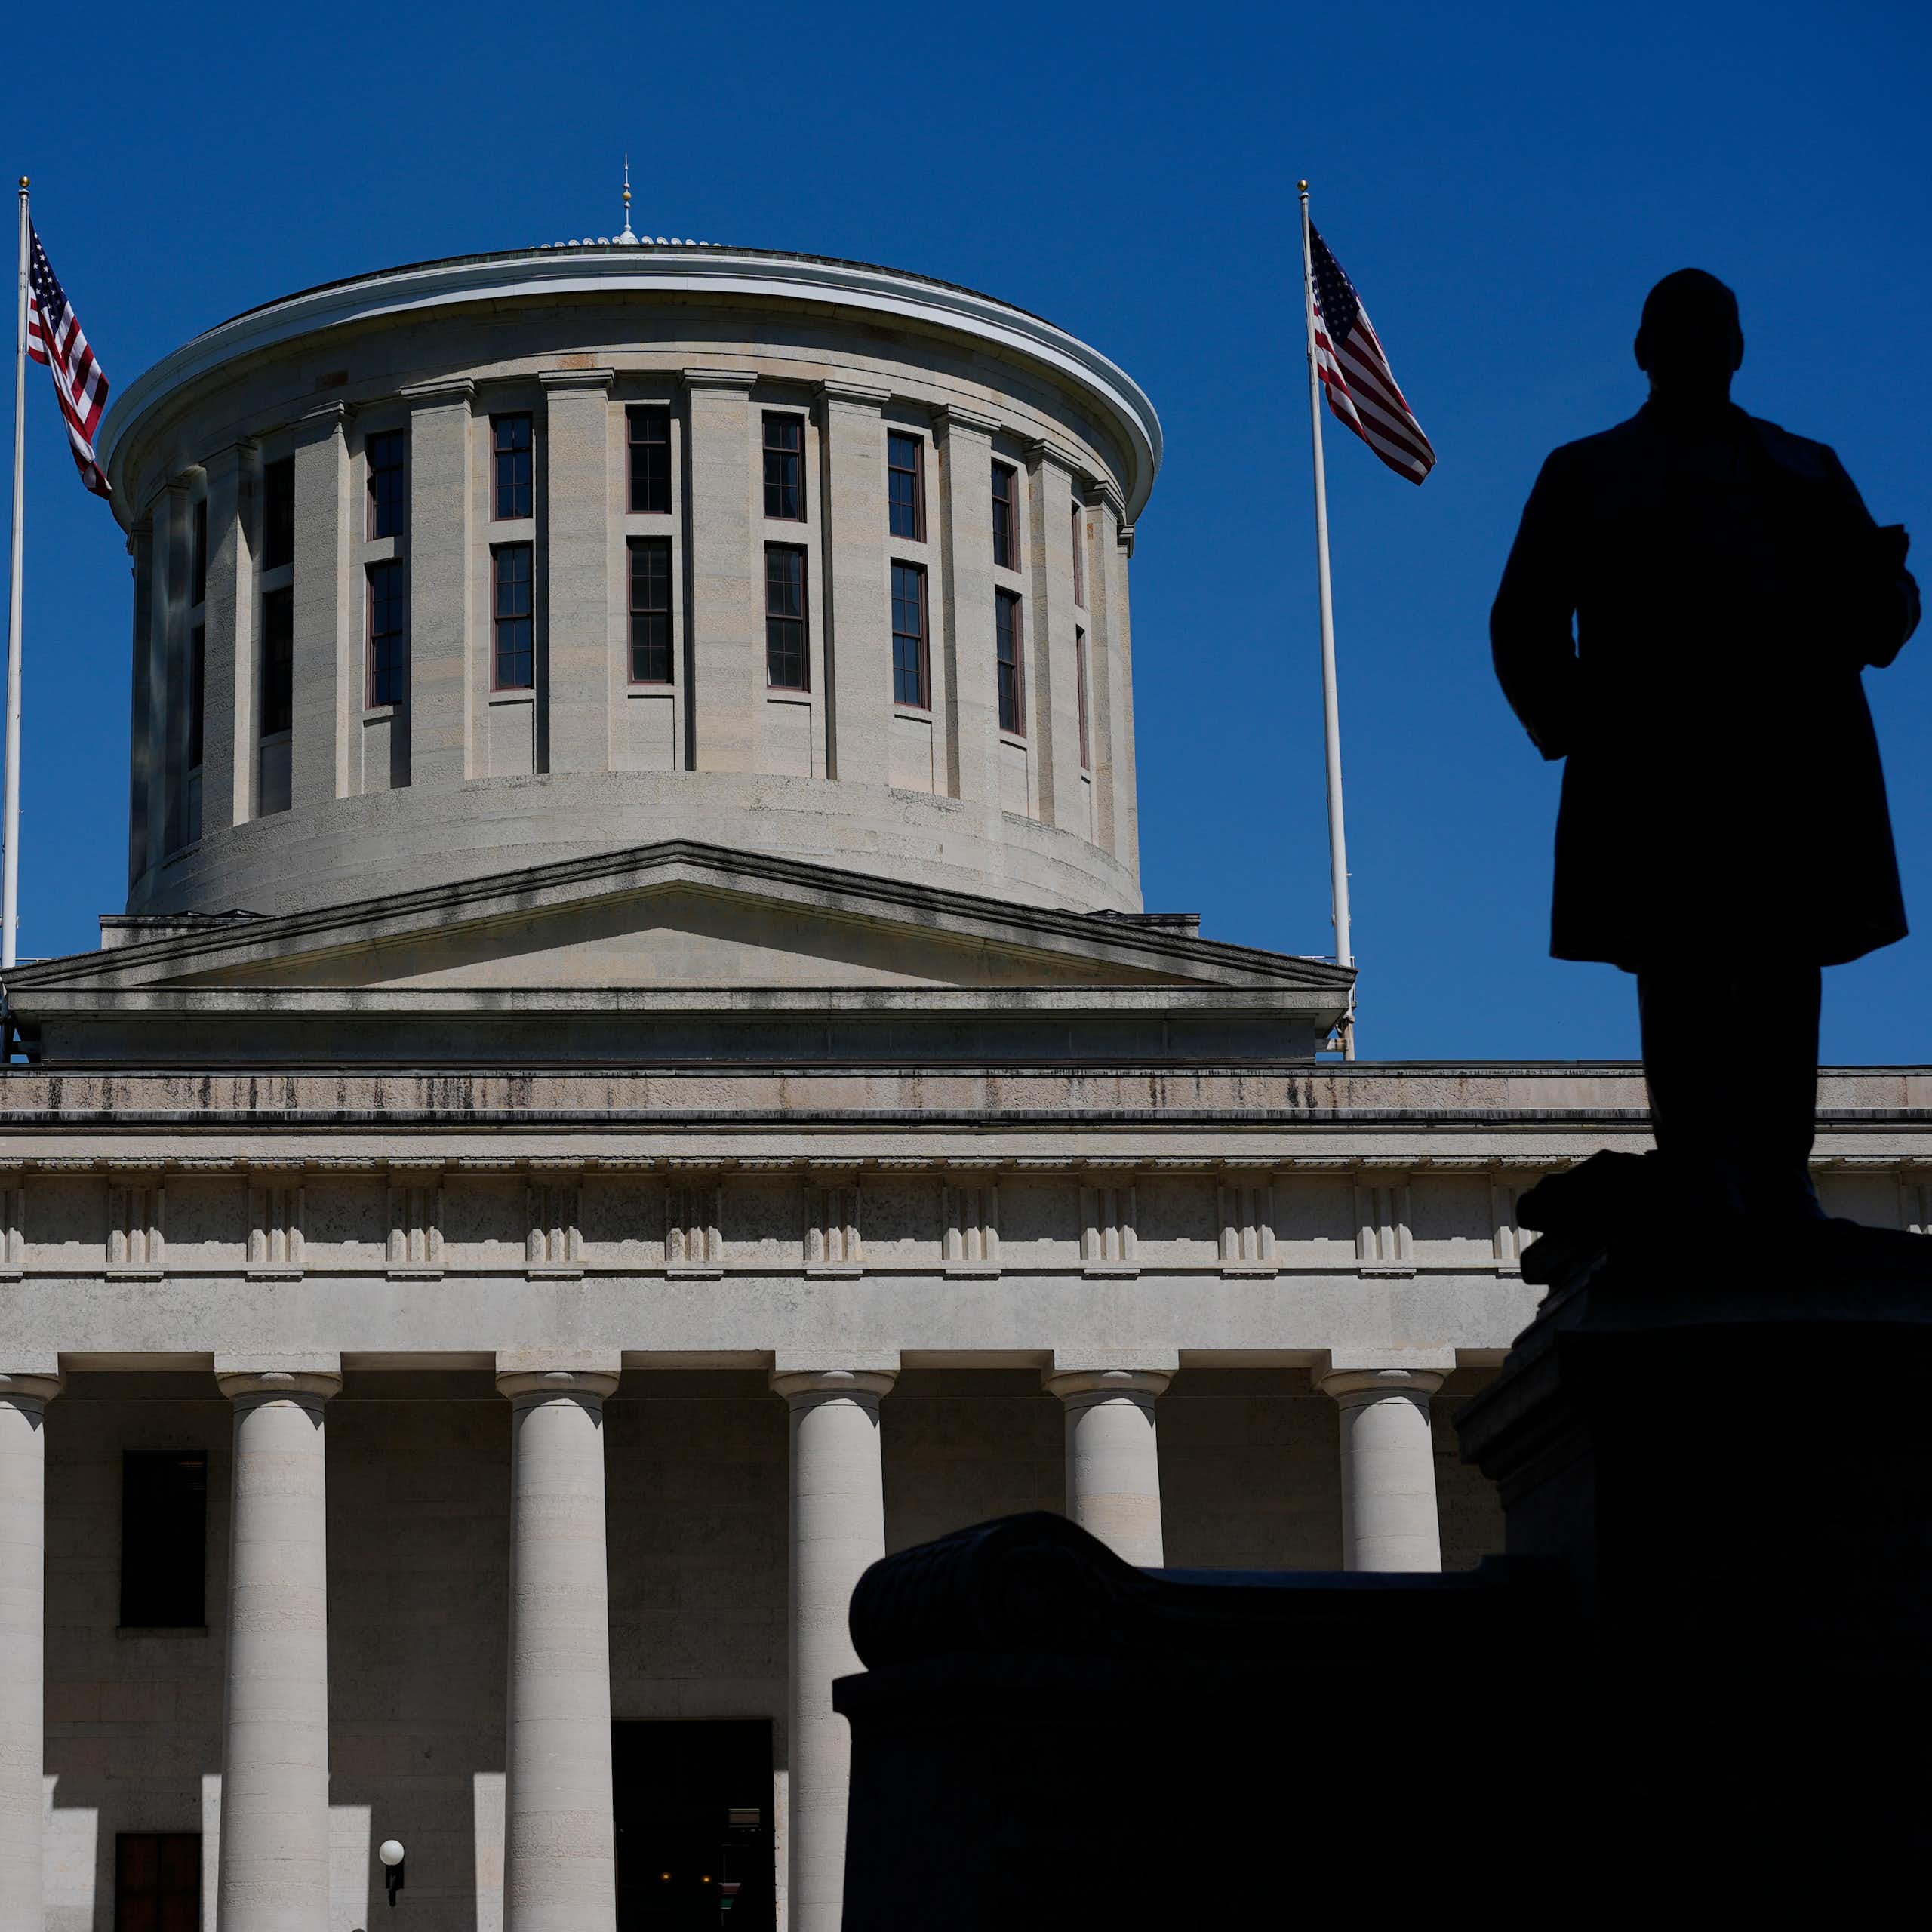 A statue of a man silhouetted against a large gray building with columns and a dome.